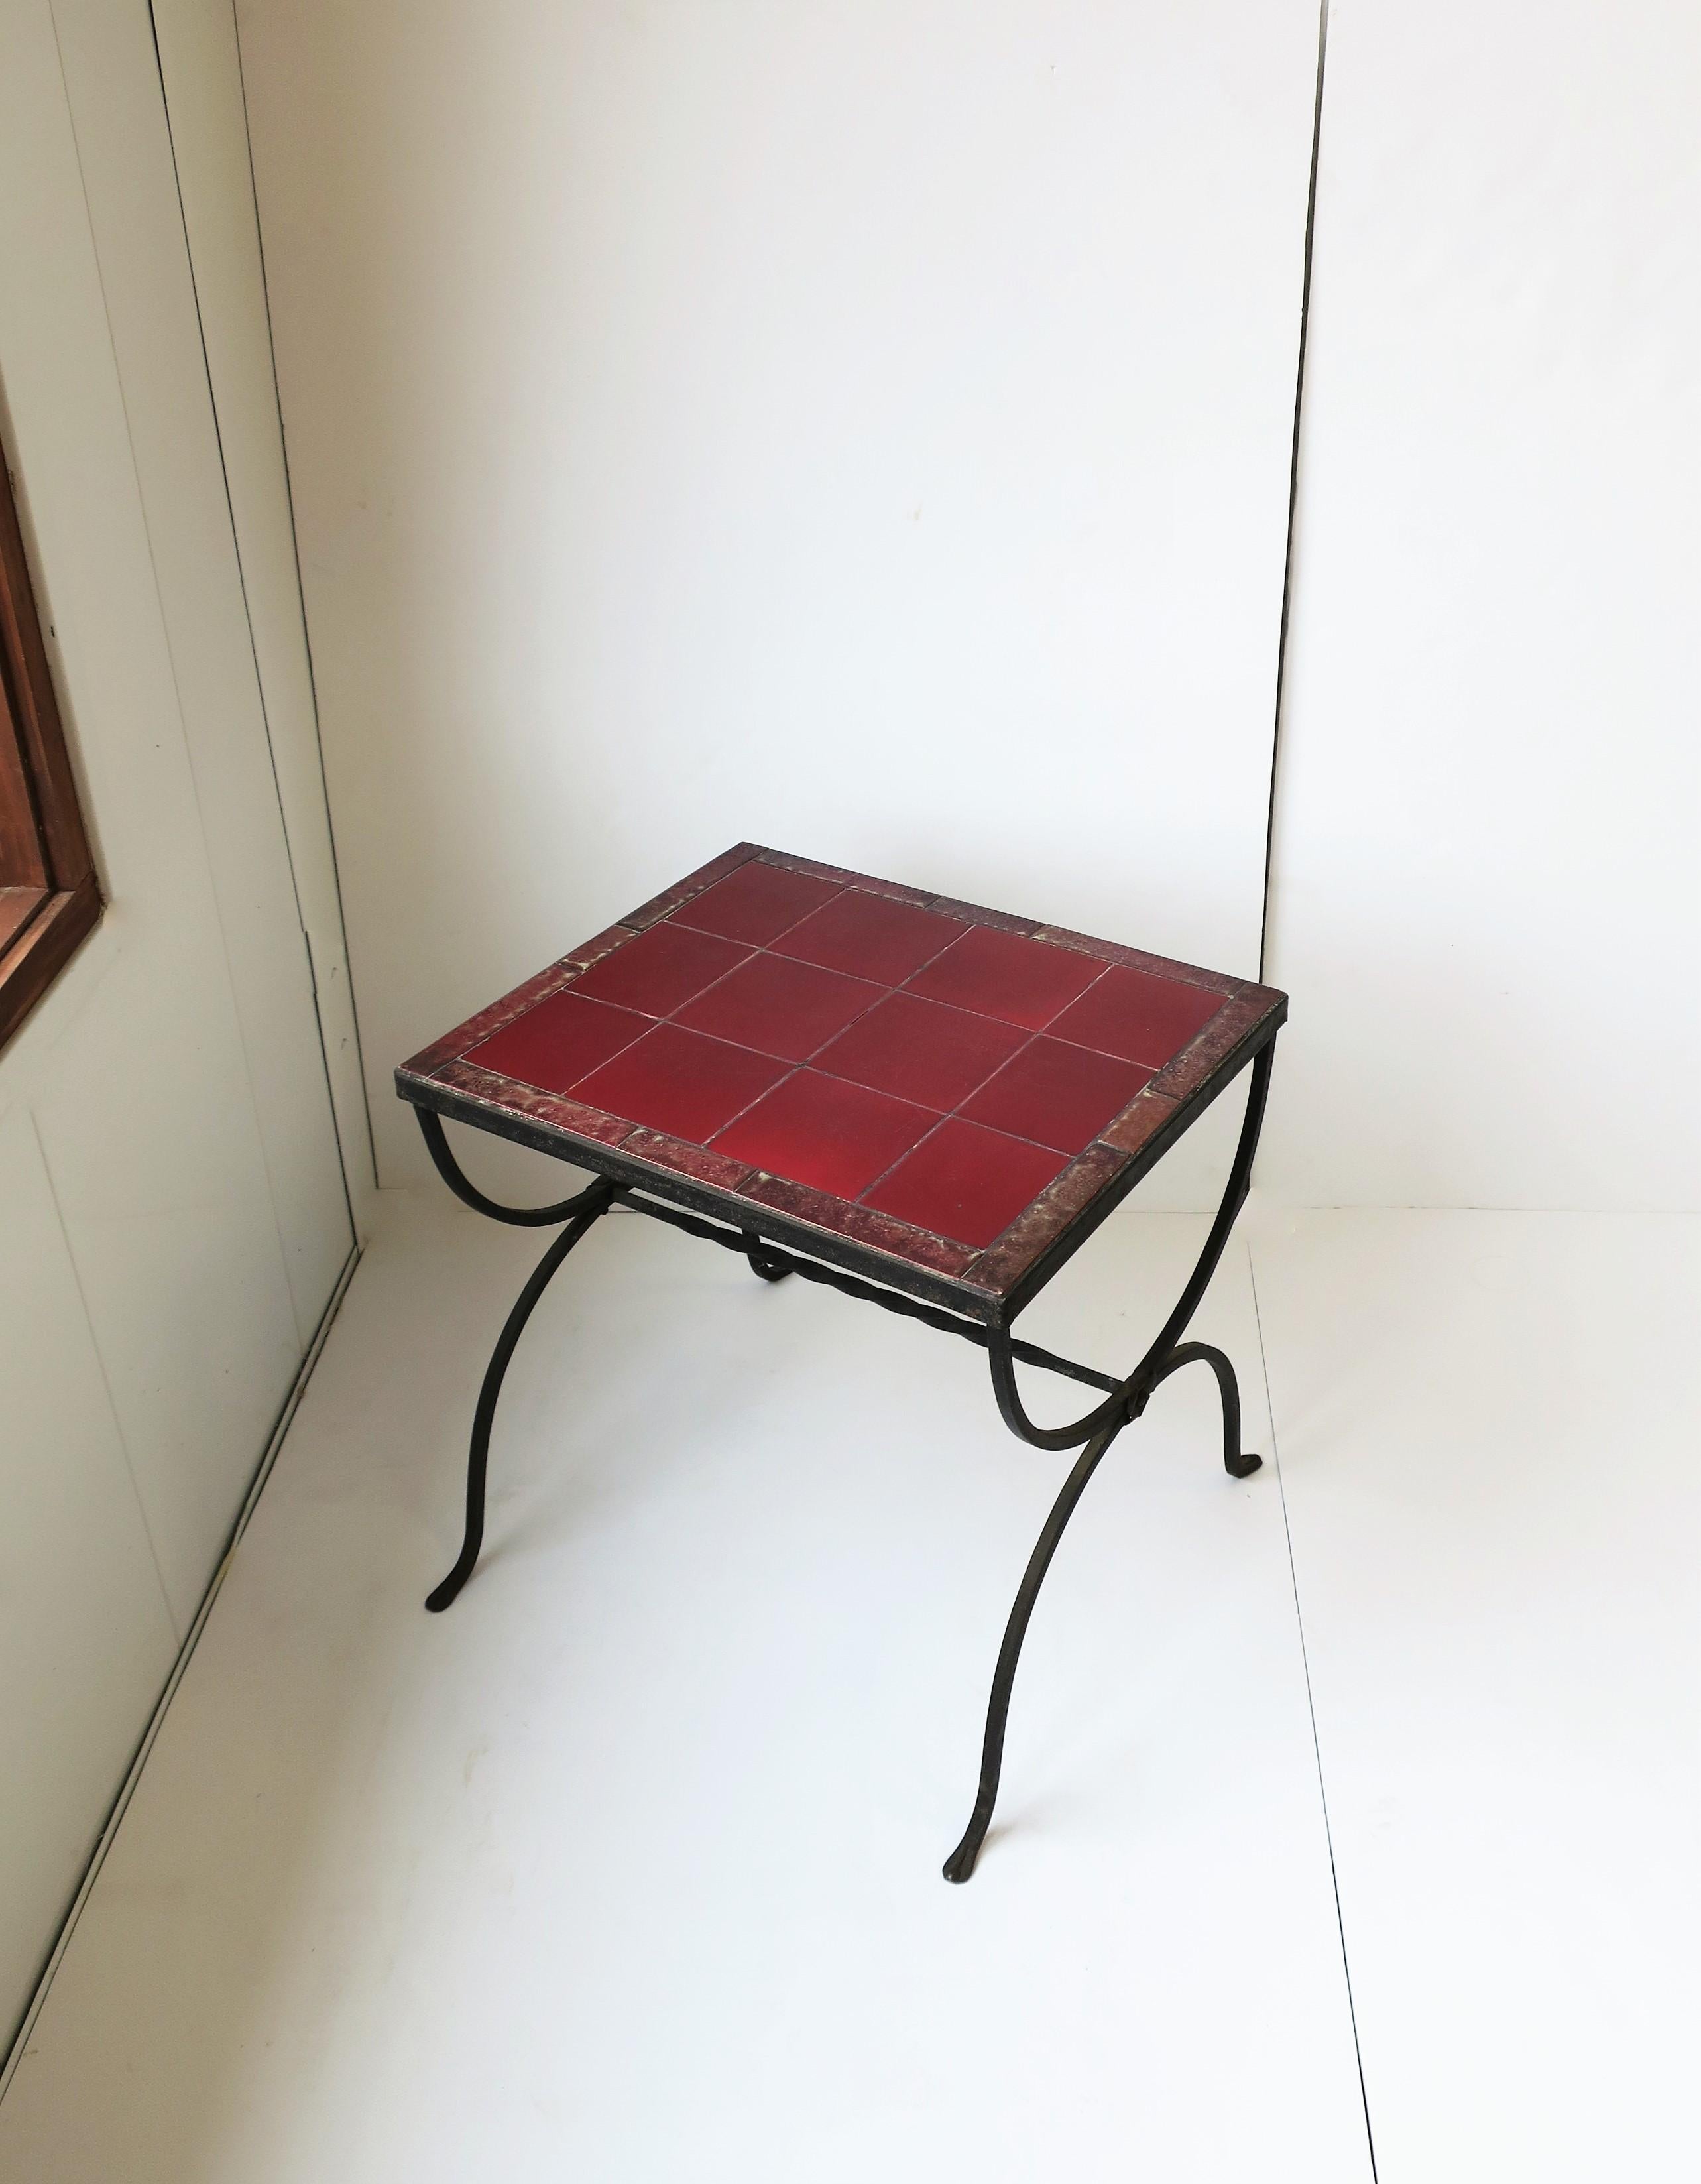 A substantial rectangular red burgundy ceramic tile top and iron end, side, or drinks table, in the Regency/Spanish Revival style, circa mid-20th century. Table has a black iron metal frame with arched design and pad feet. Top includes twelve square